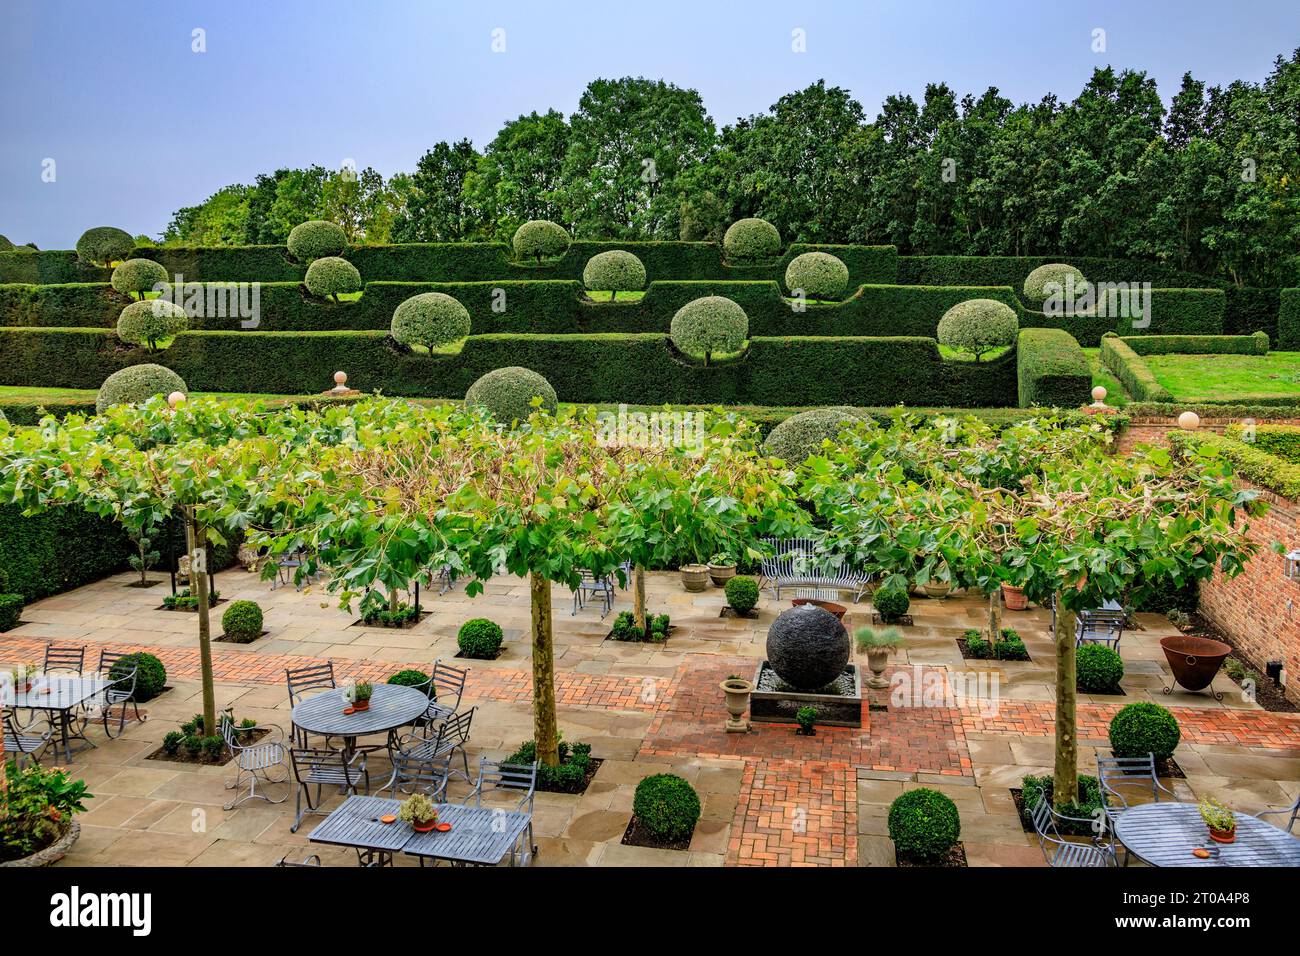 The meticulously and neatly shaped pear trees and yew hedges in the gardens of The Old Hall Hotel near Ely, Cambridgeshire, England, UK Stock Photo